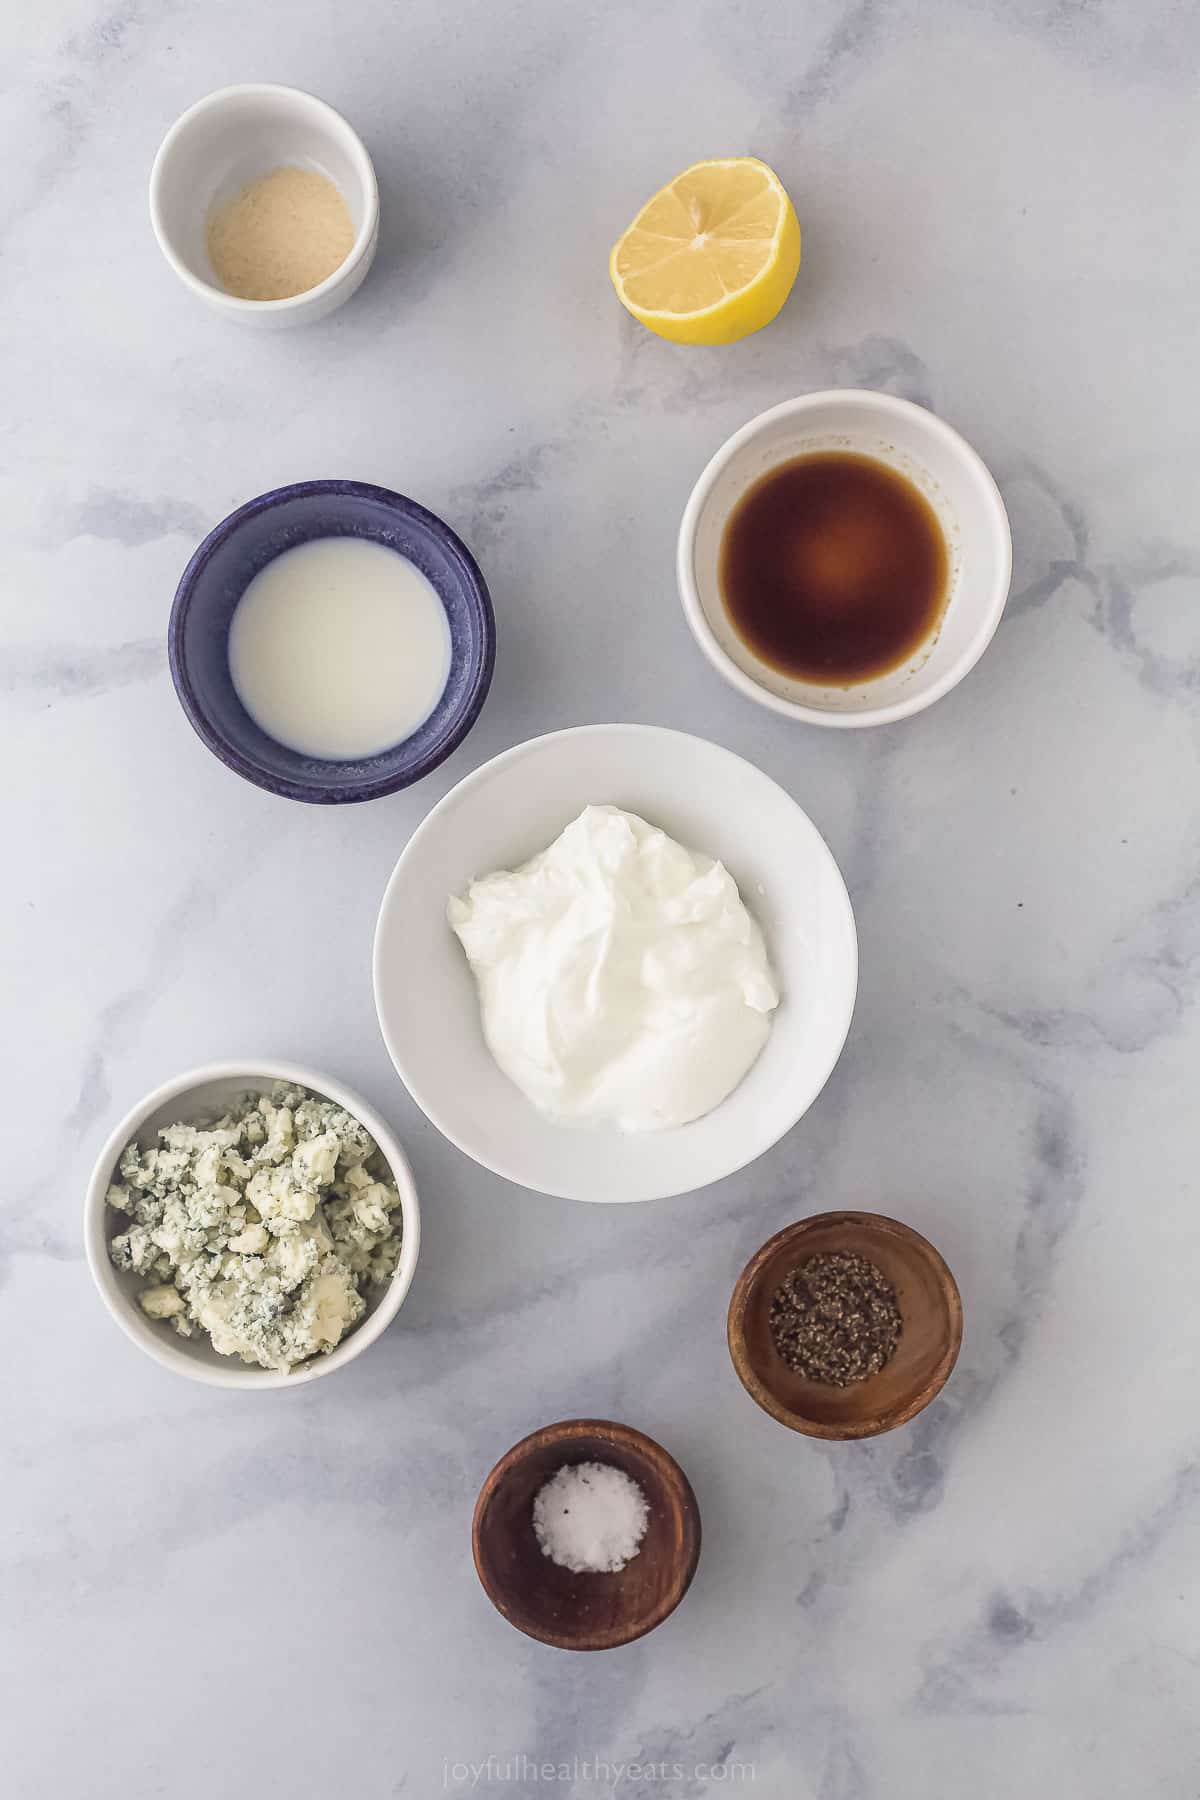 Ingredients to make creamy blue cheese dressing like blue cheese, salt, pepper, worcestershire sauce, cream, and sour cream